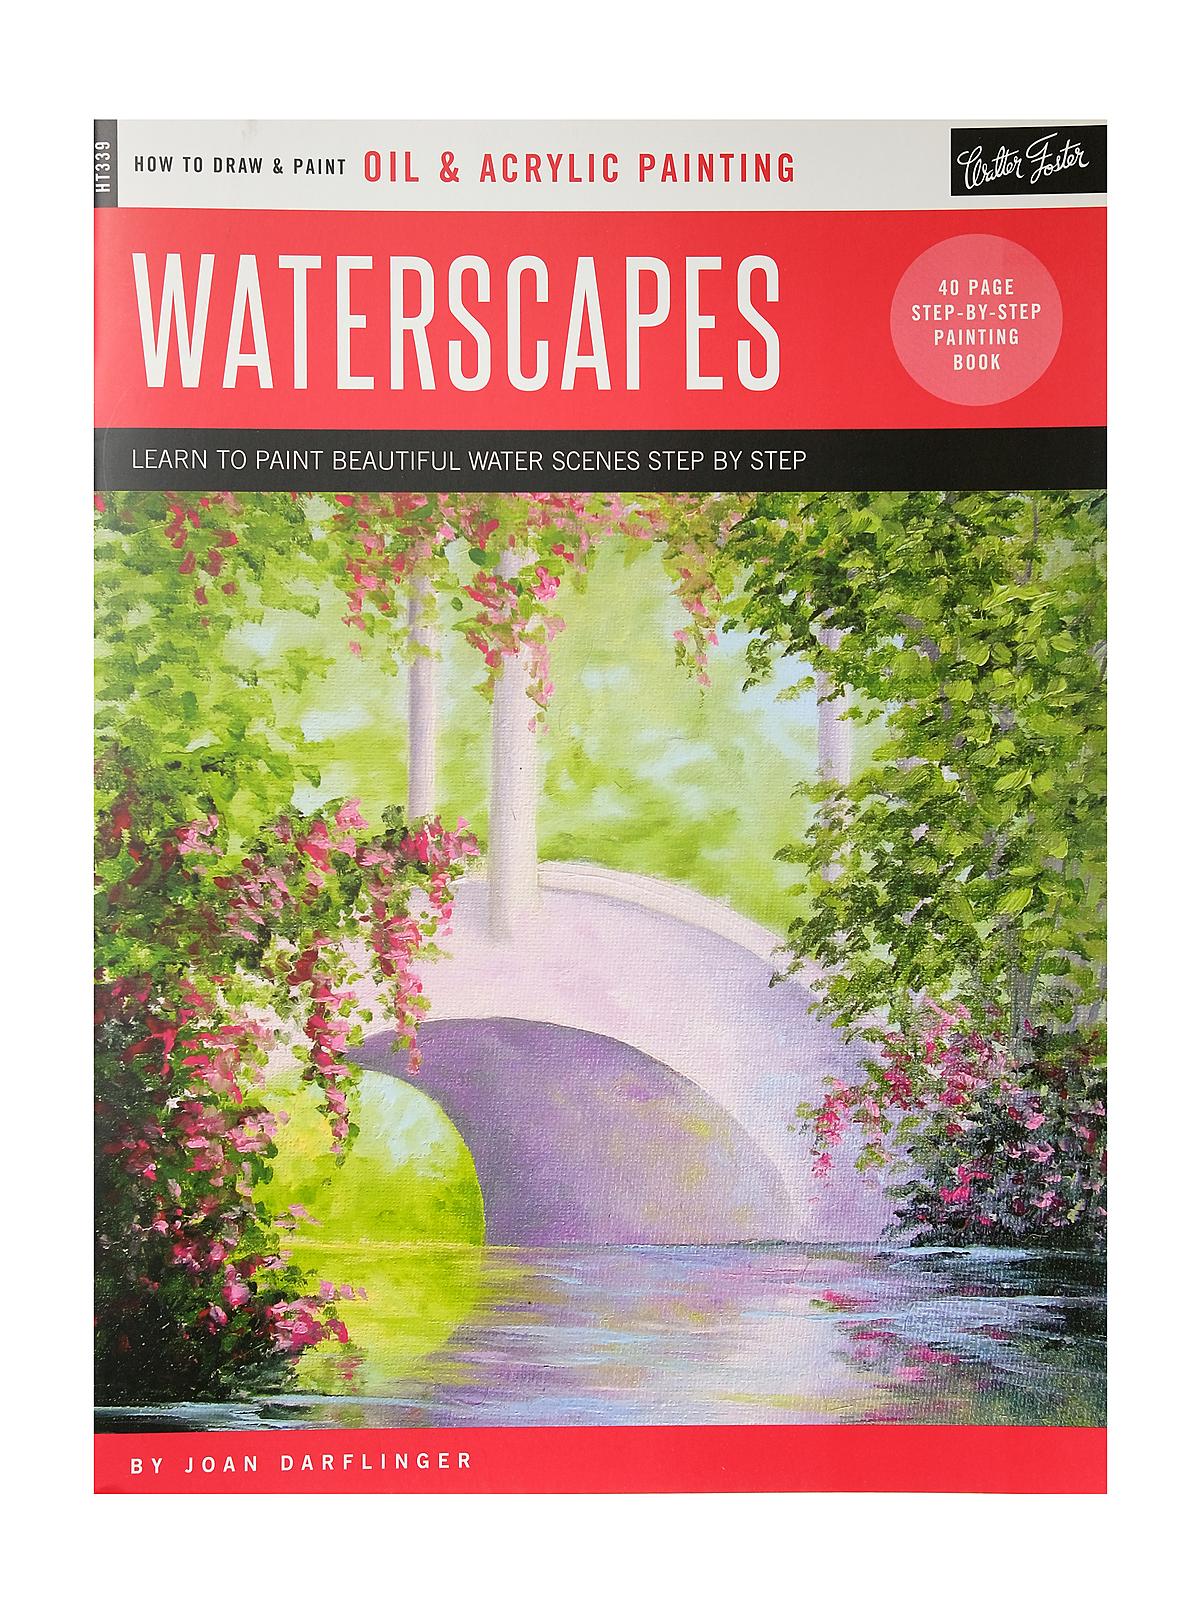 How To Series: Oil & Acrylic Waterscapes